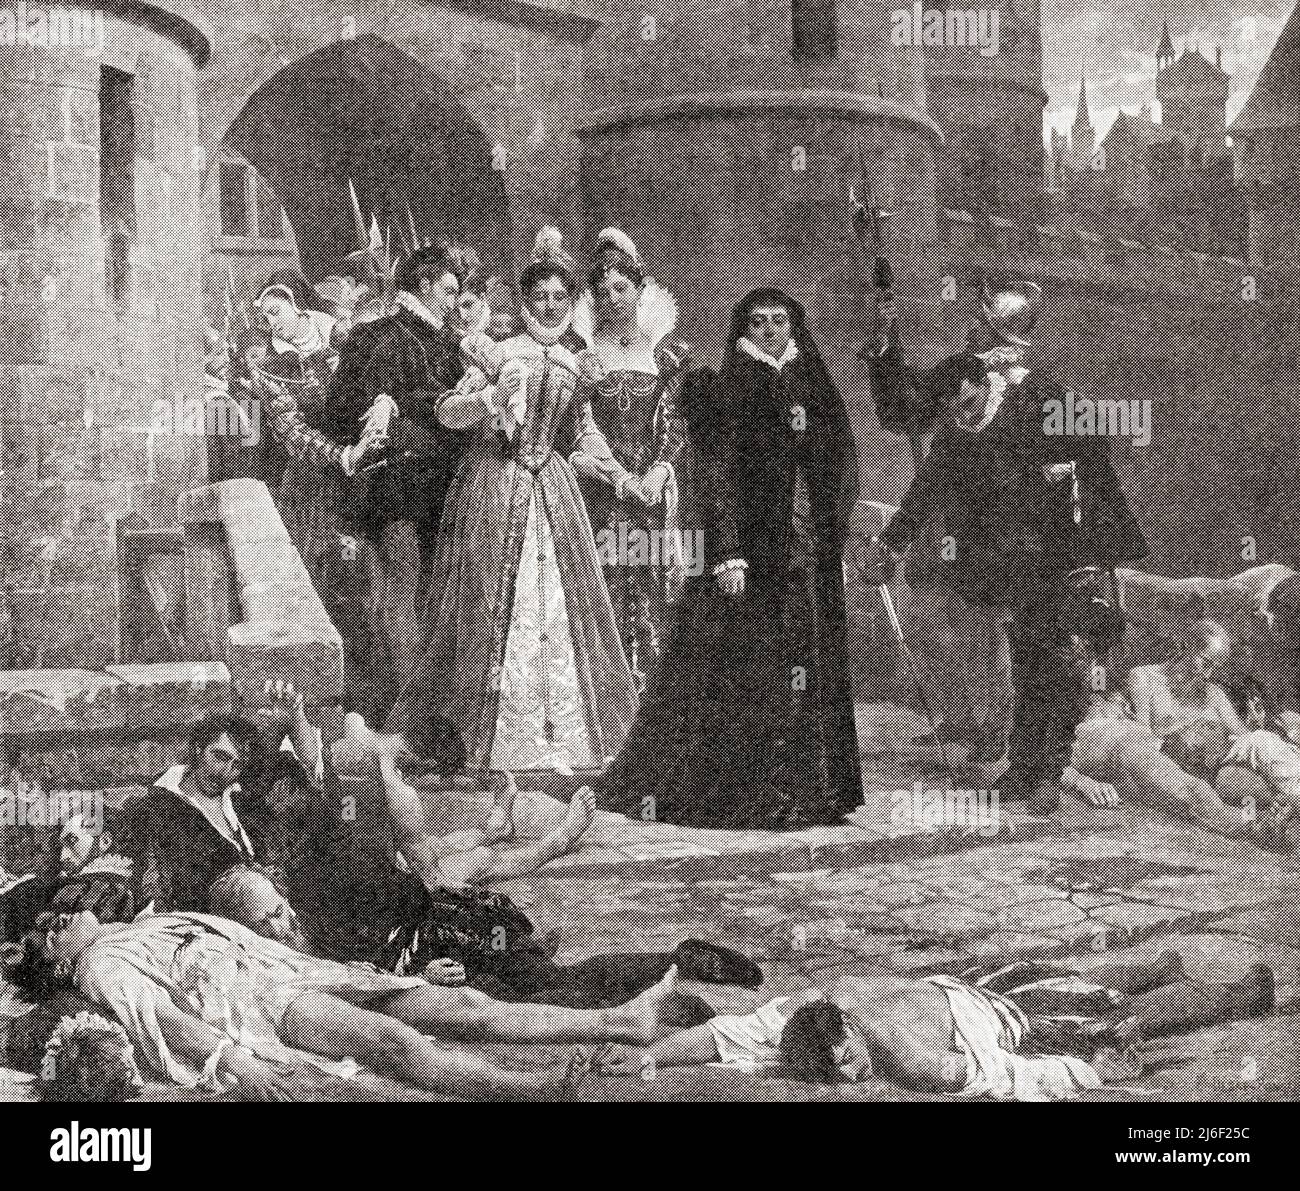 Catherine de' Medici regards with indifference the bodies of victims of the The St. Bartholomew's Day massacre in 1572. A targeted group of assassinations and a wave of Catholic mob violence directed against the Huguenots during the French Wars of Religion believed to have been instigated by Catherine de' Medici. Catherine de' Medici,1519 –1589. Italian noblewoman who was Queen of France as the wife of King Henry II.  From The Wonderland of Knowledge, published c.1930 Stock Photo